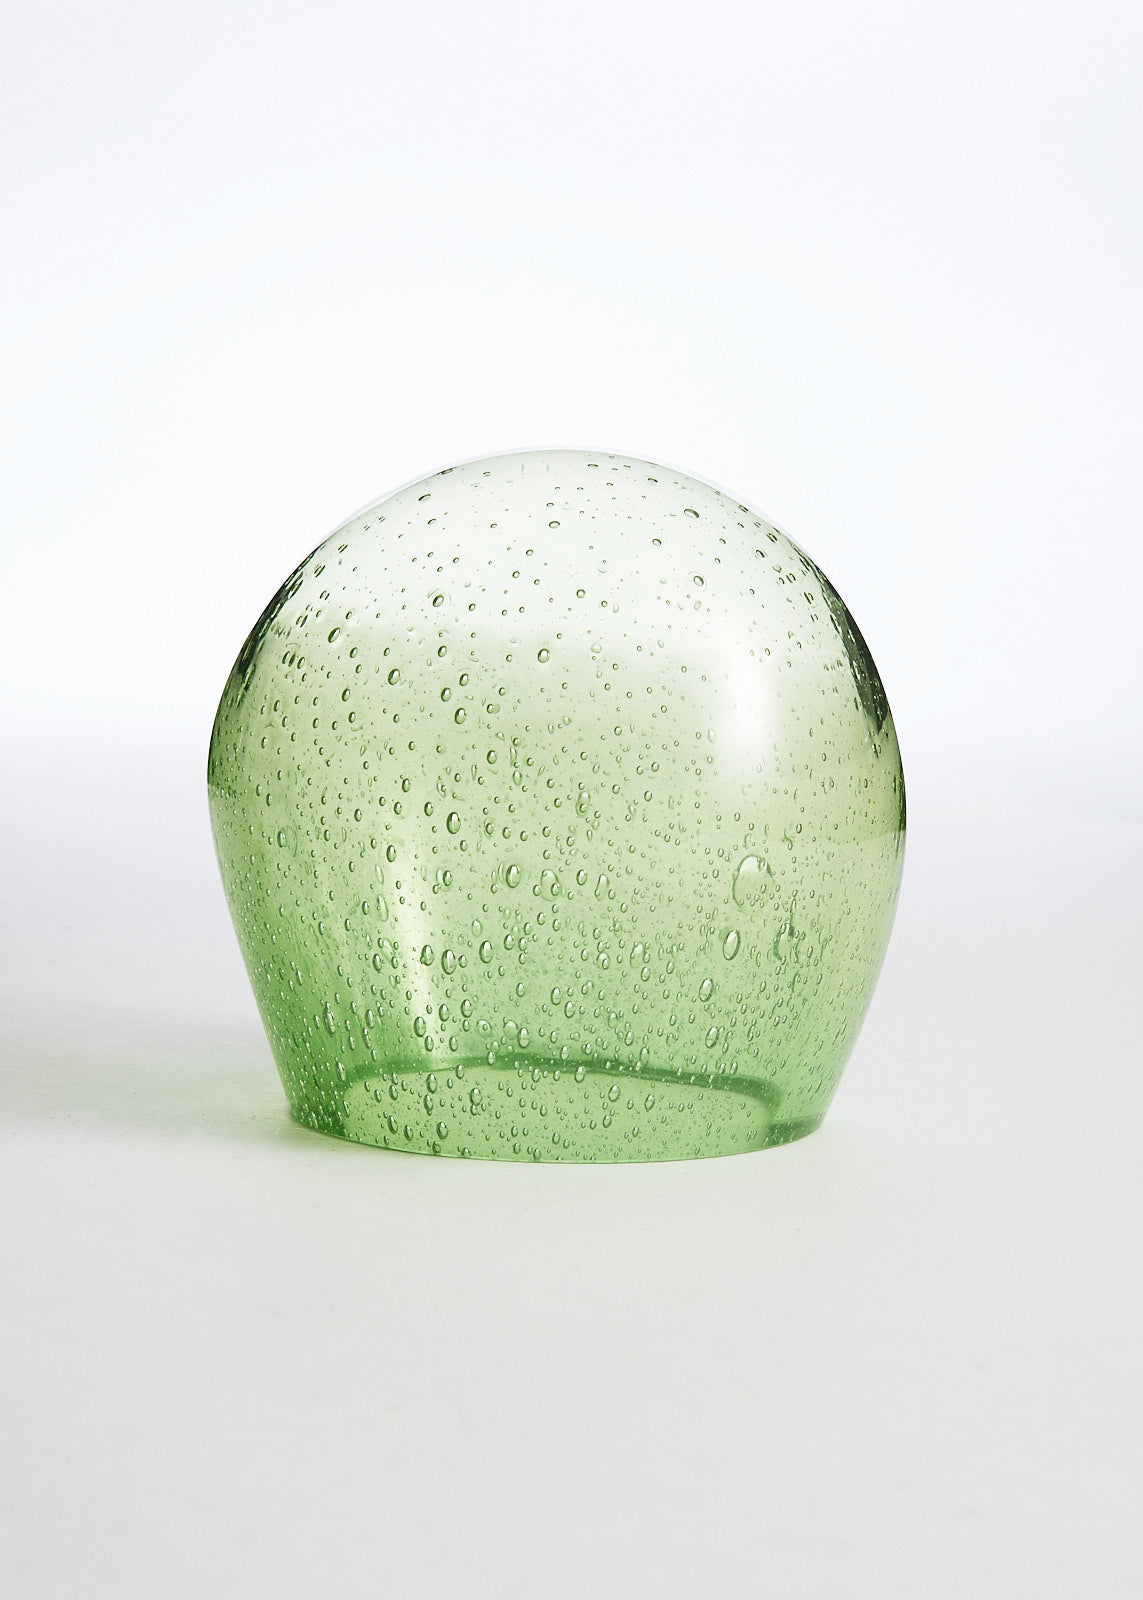 Bubble, green with tiny bubbles